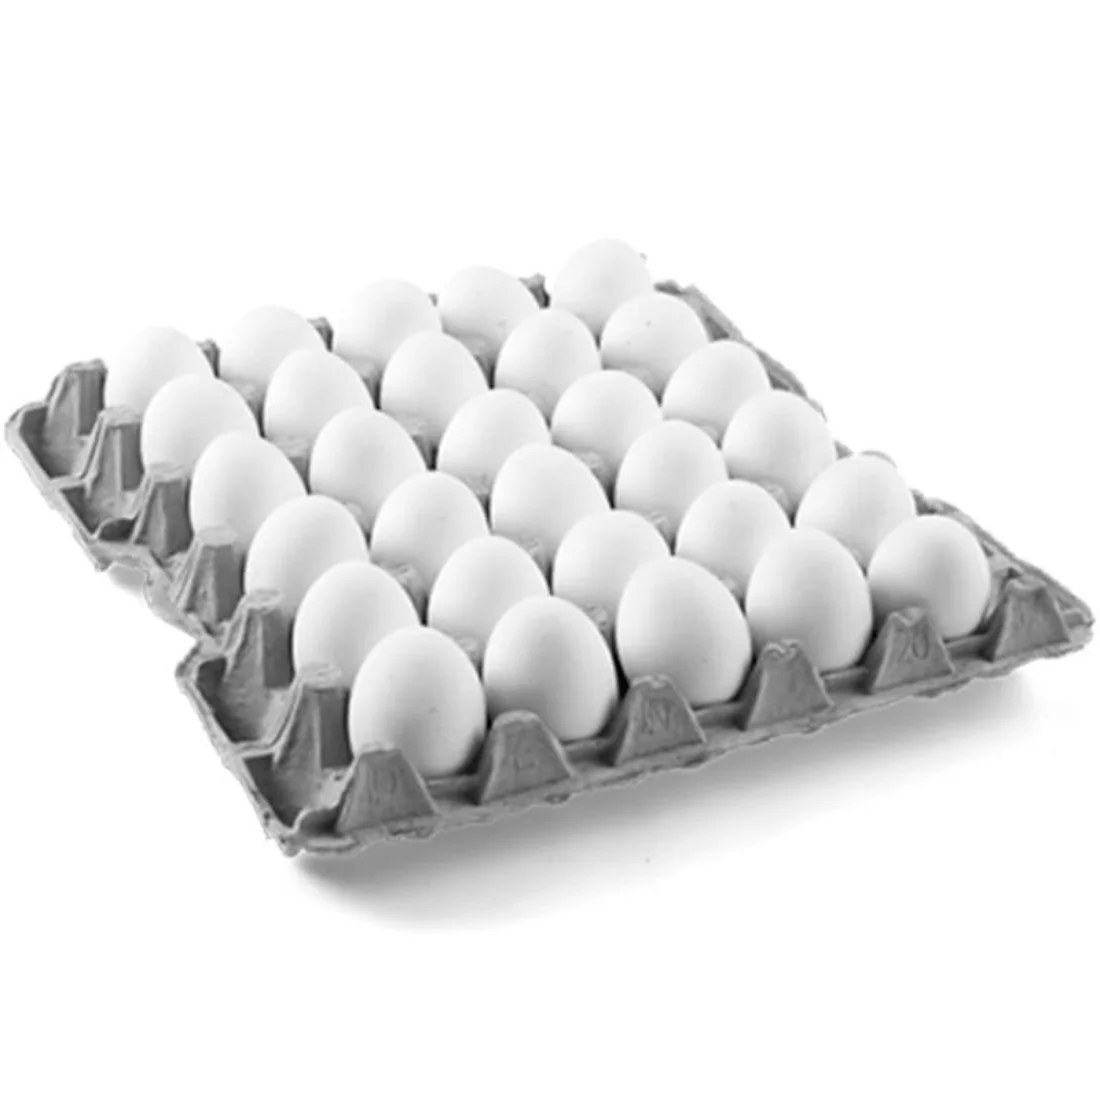 Poultry Egg 1 Crate